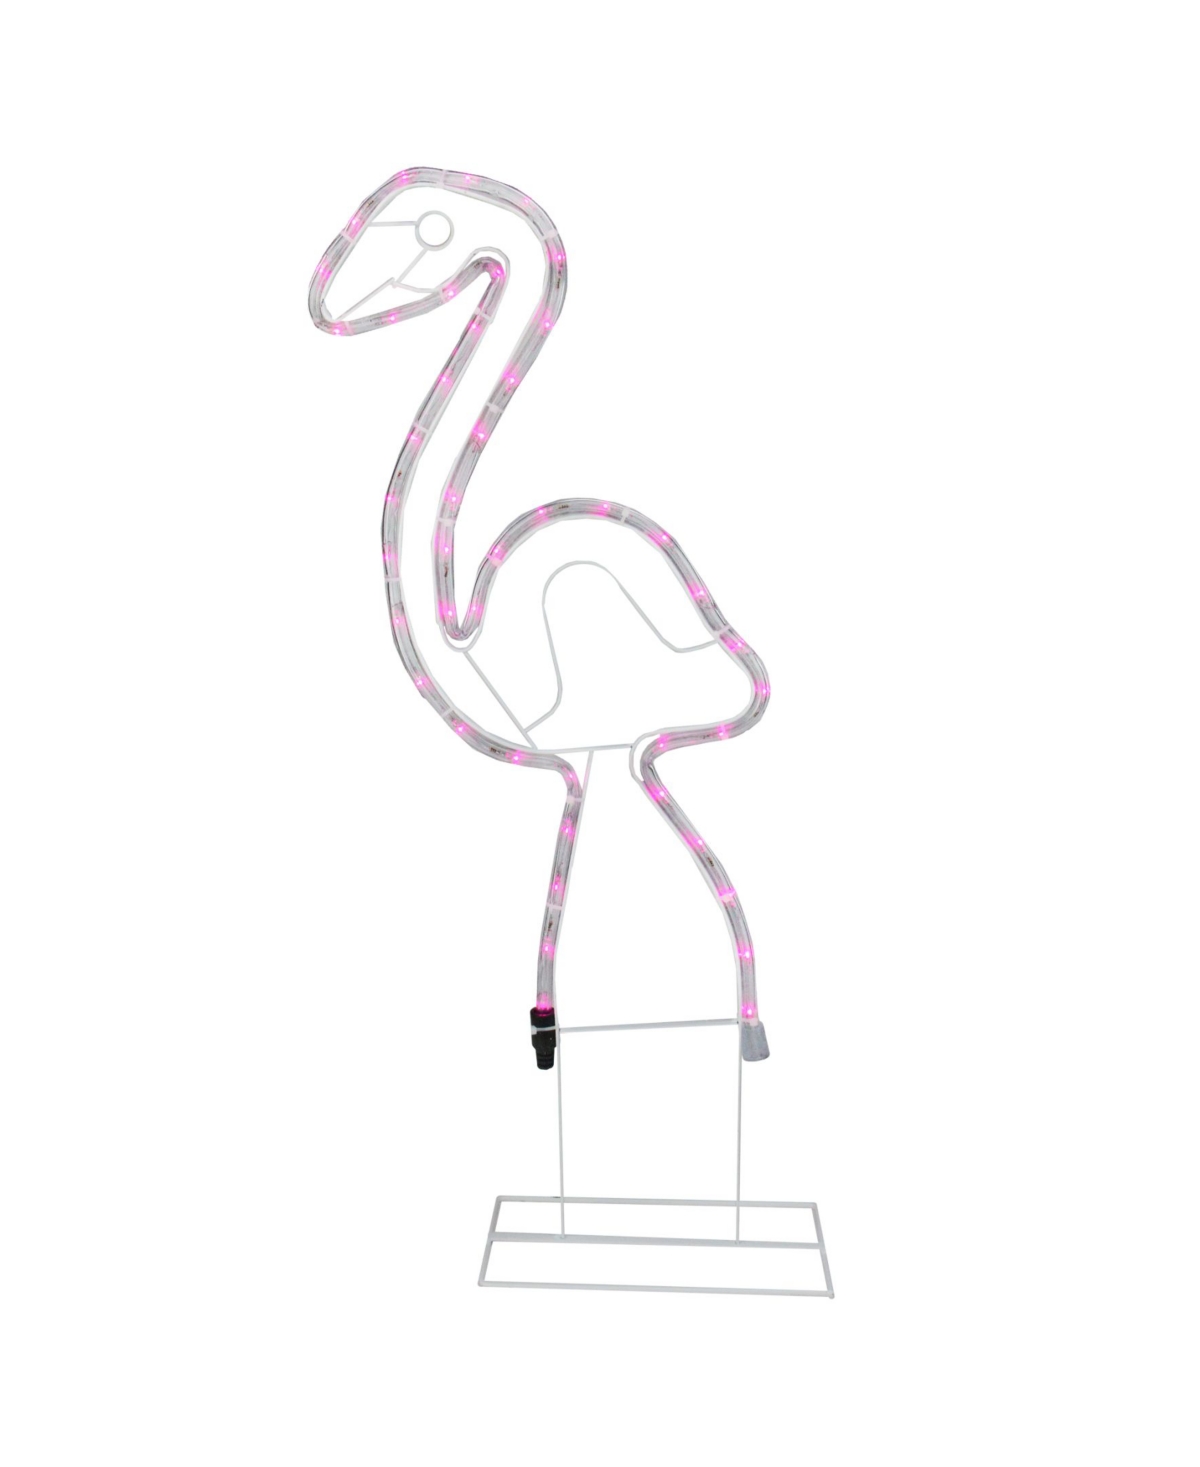 Northlight Flamingo Led Rope Light Silhouette Summer Outdoor Decoration In Pink